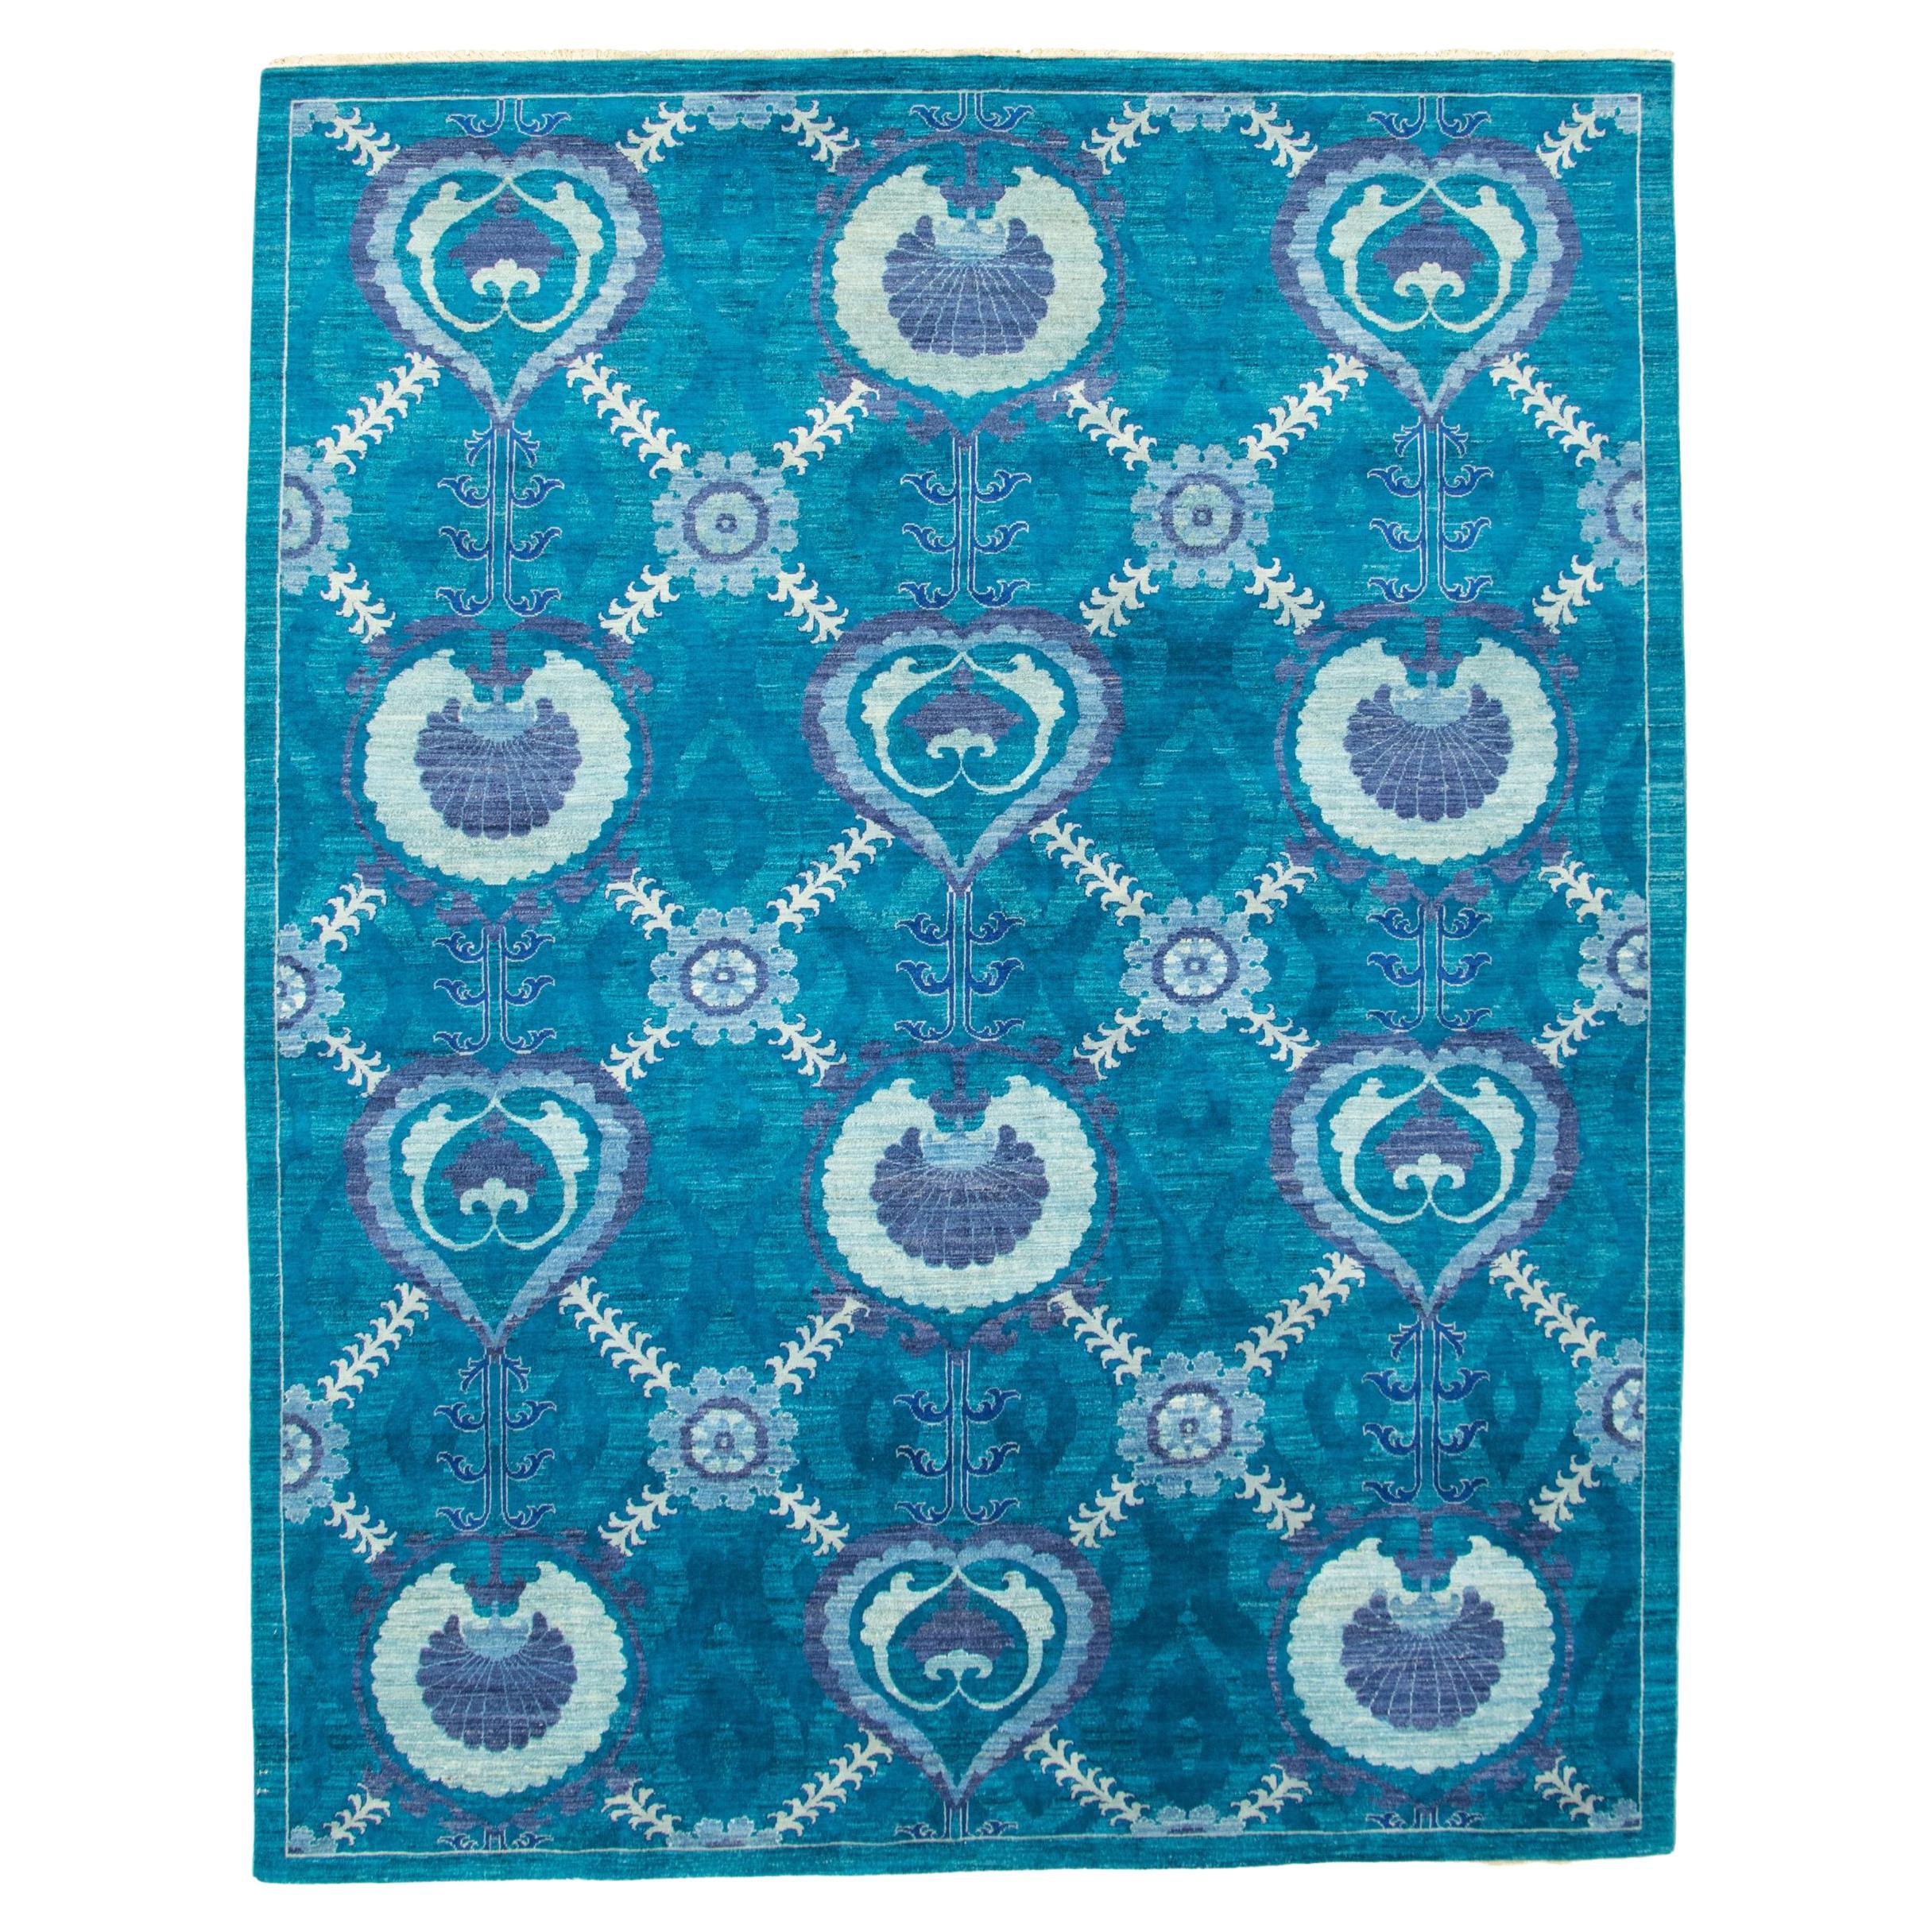 Preppy Aqua Blue Arts and Crafts Wool Oushak Hand-Knotted Carpet, 8' x 10' For Sale